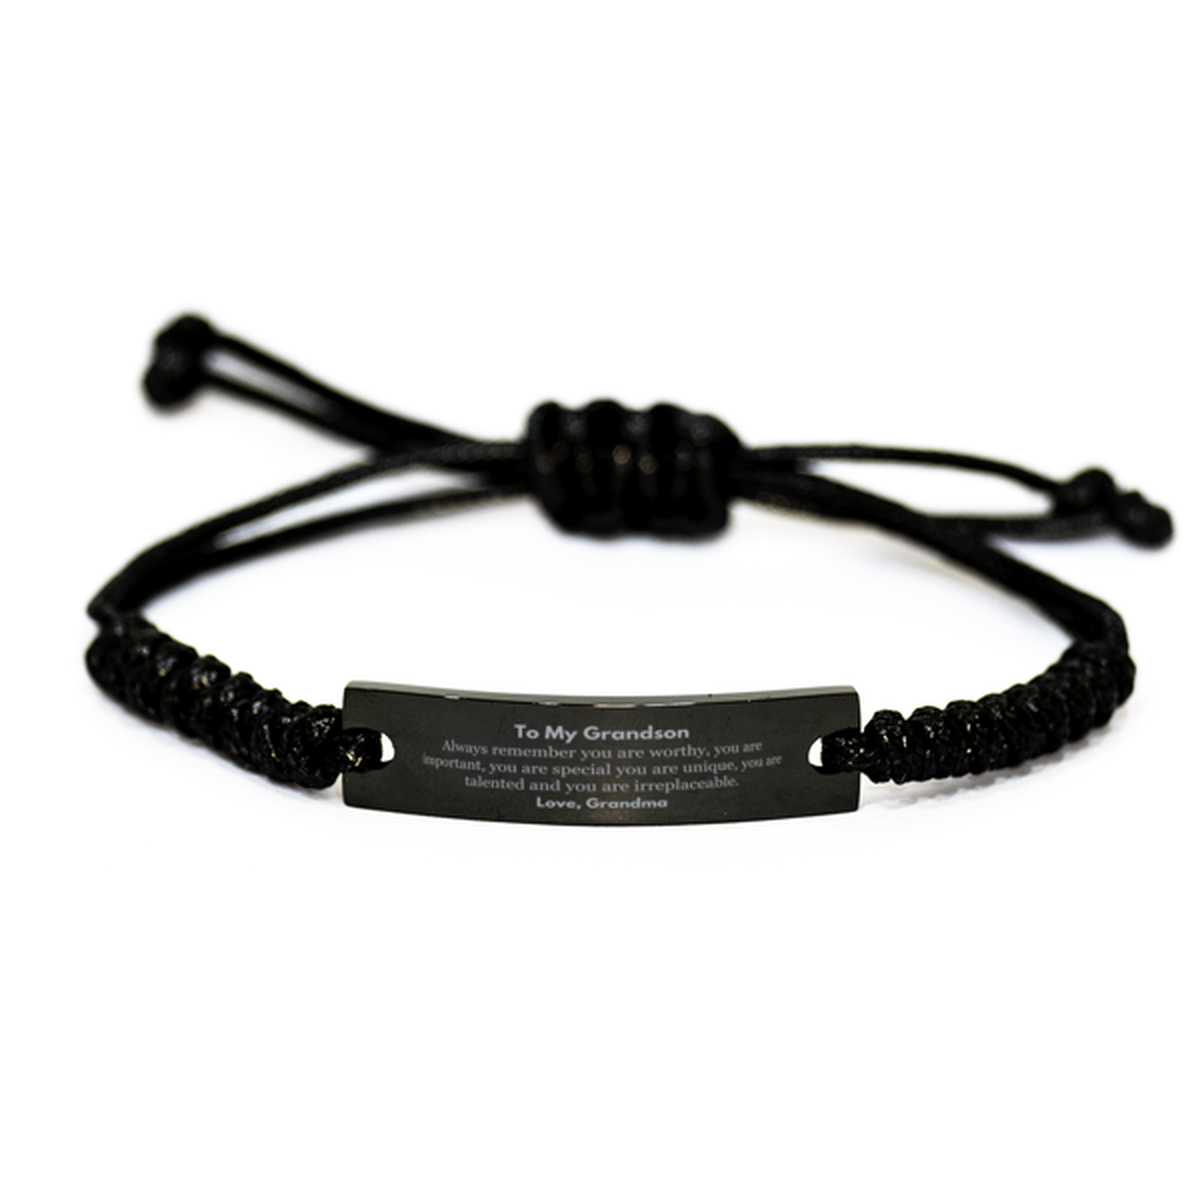 Grandson Birthday Gifts from Grandma, Inspirational Black Rope Bracelet for Grandson Christmas Graduation Gifts for Grandson Always remember you are worthy, you are important. Love, Grandma